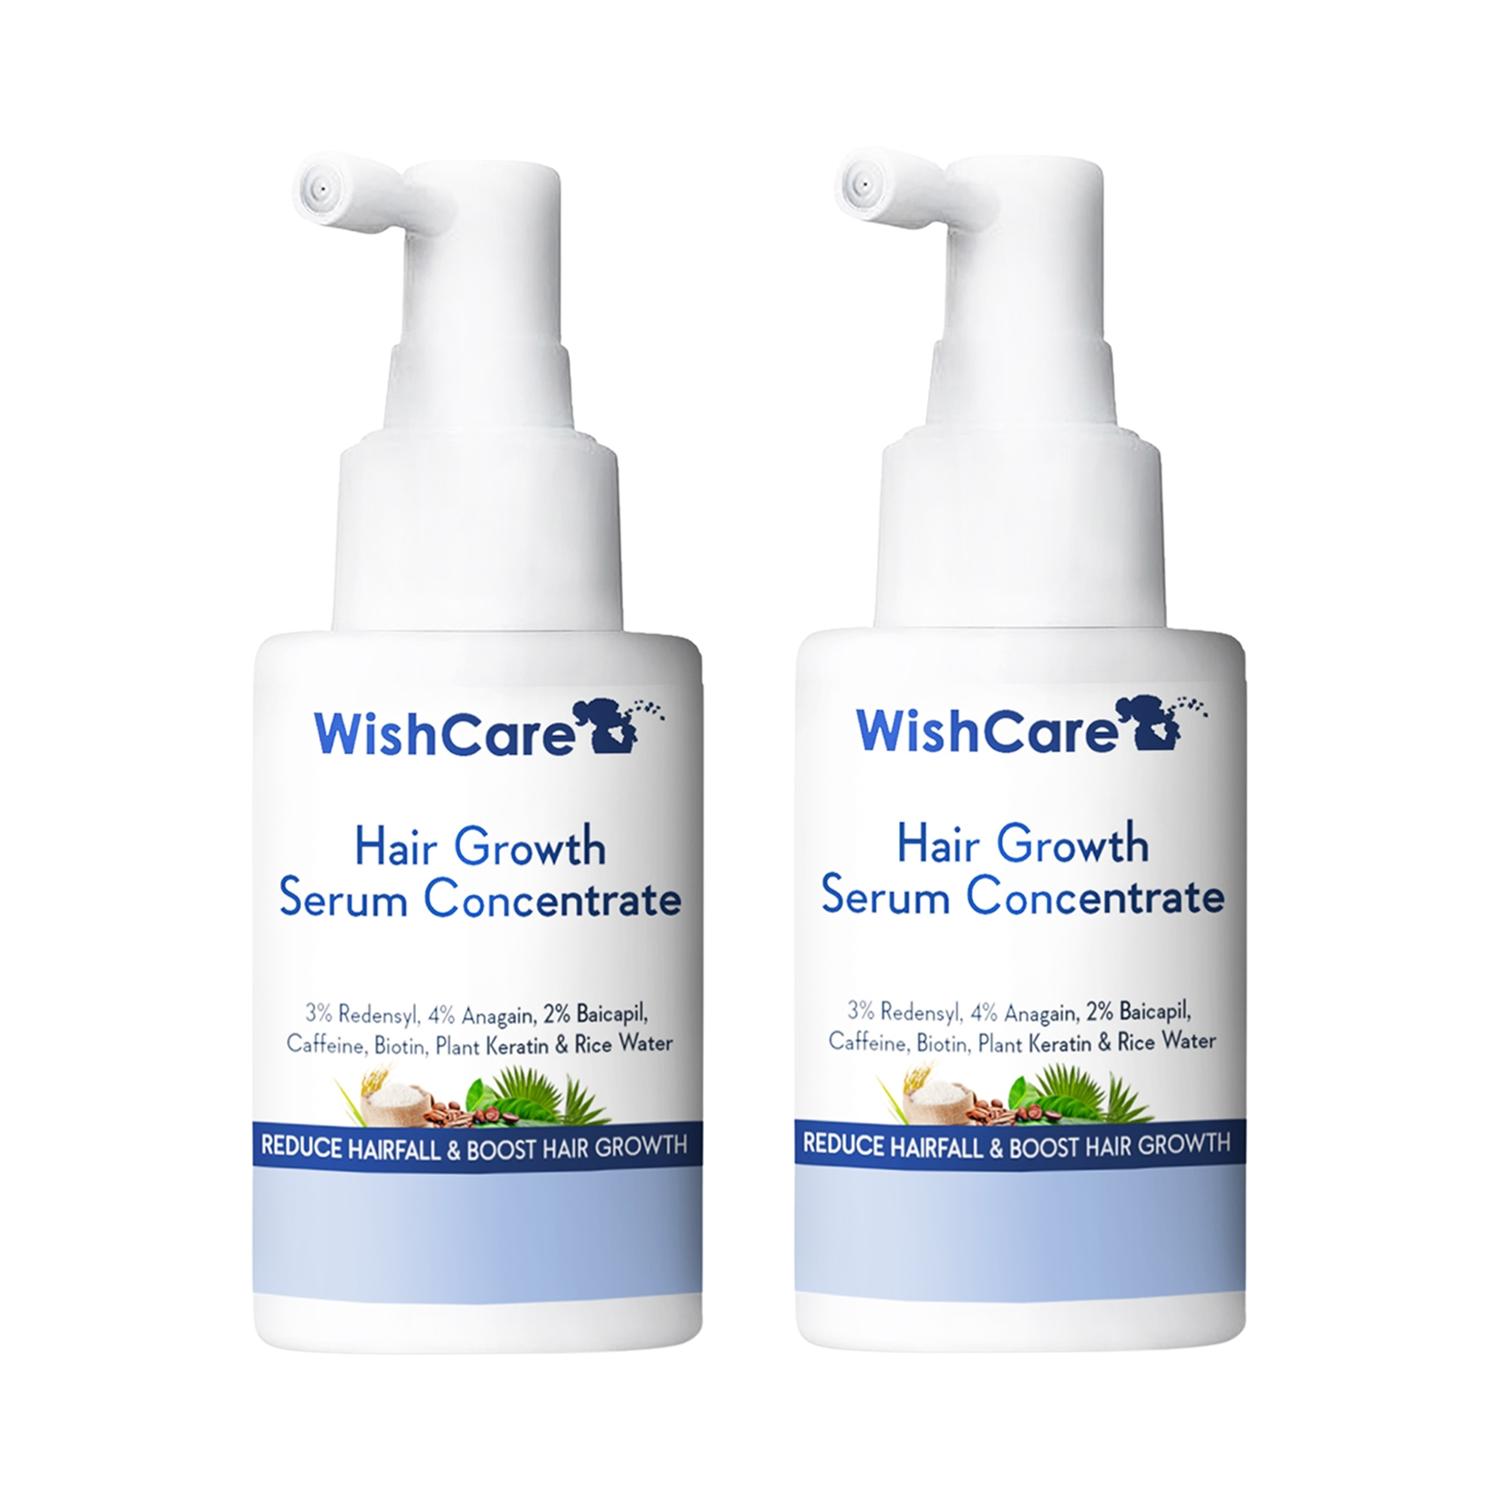 Wishcare Invisible Gel Sunscreen SPF50+ PA++++ - Broad Spectrum Protection  With No White Cast (50g)